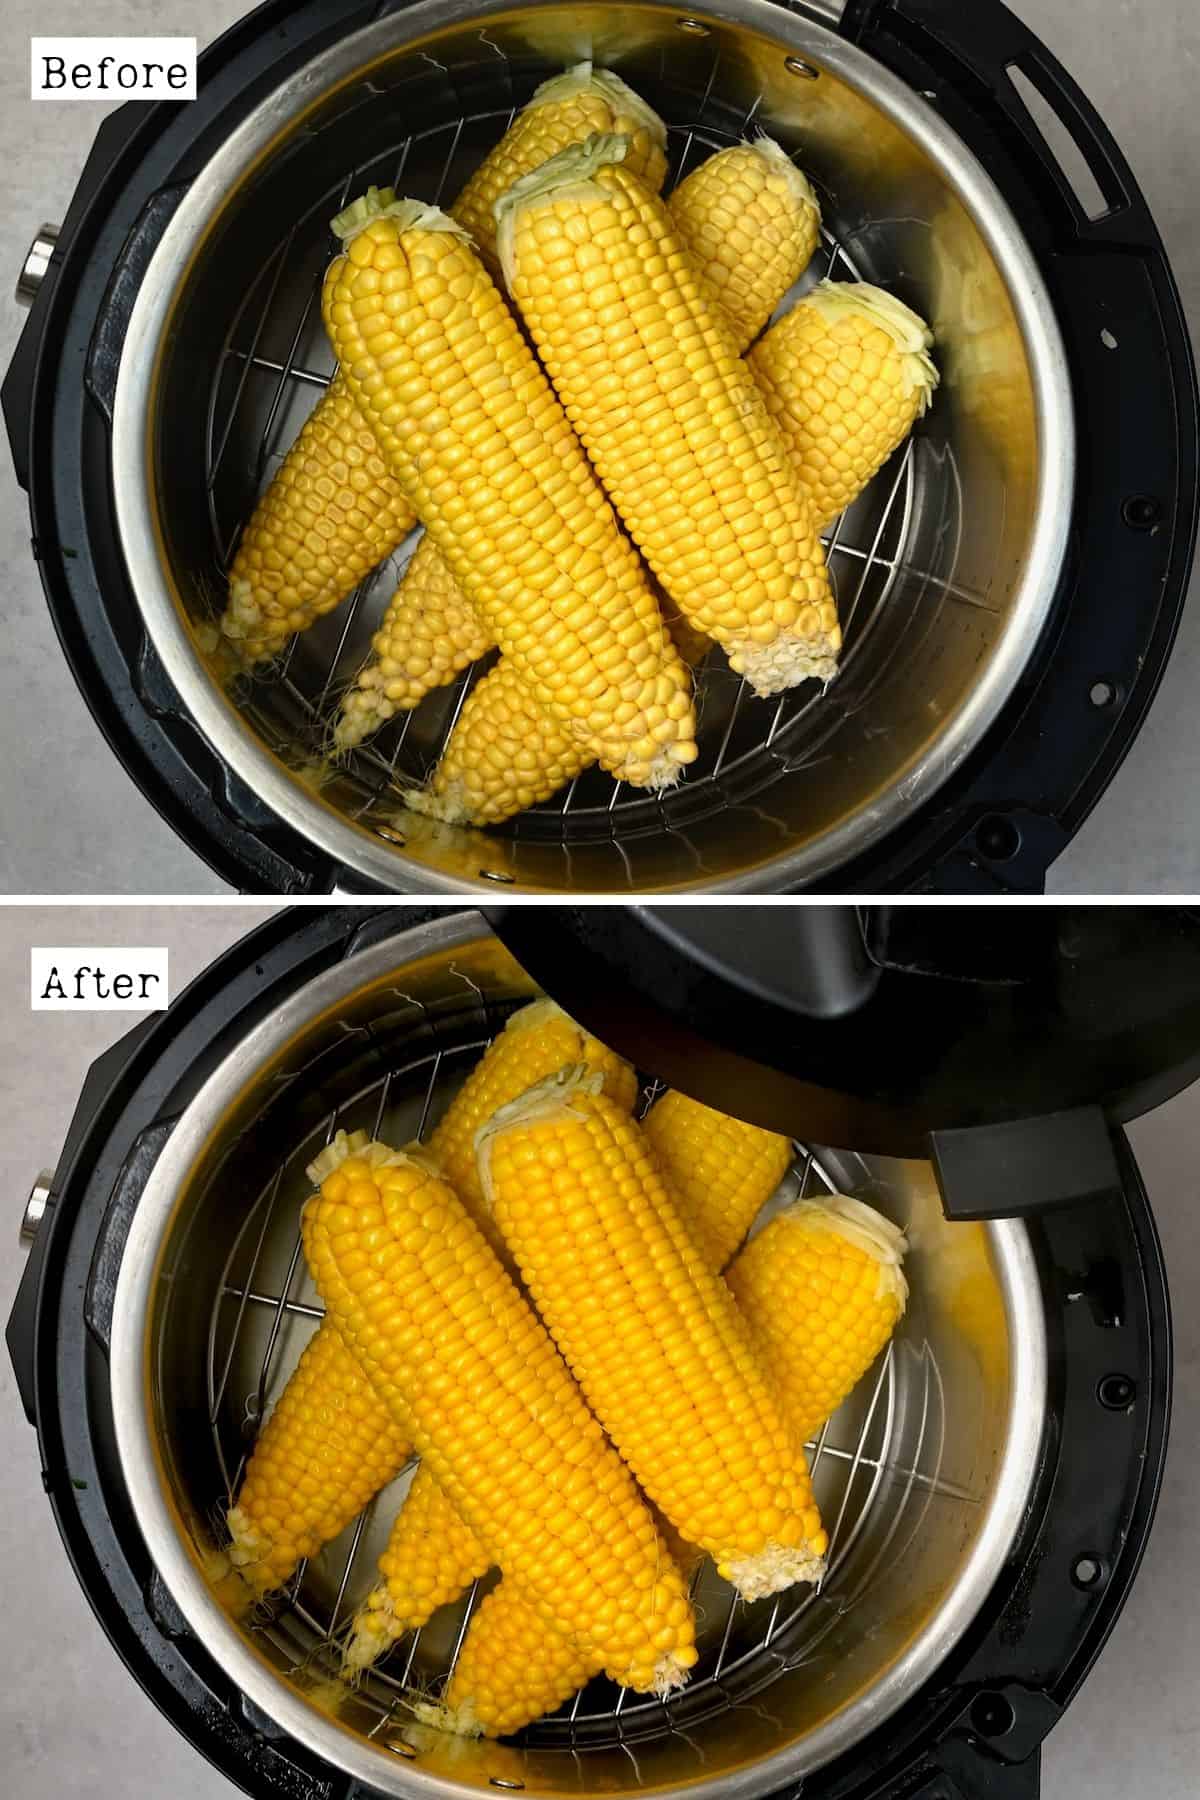 Before and after cooking corn on the cob in an instant pot